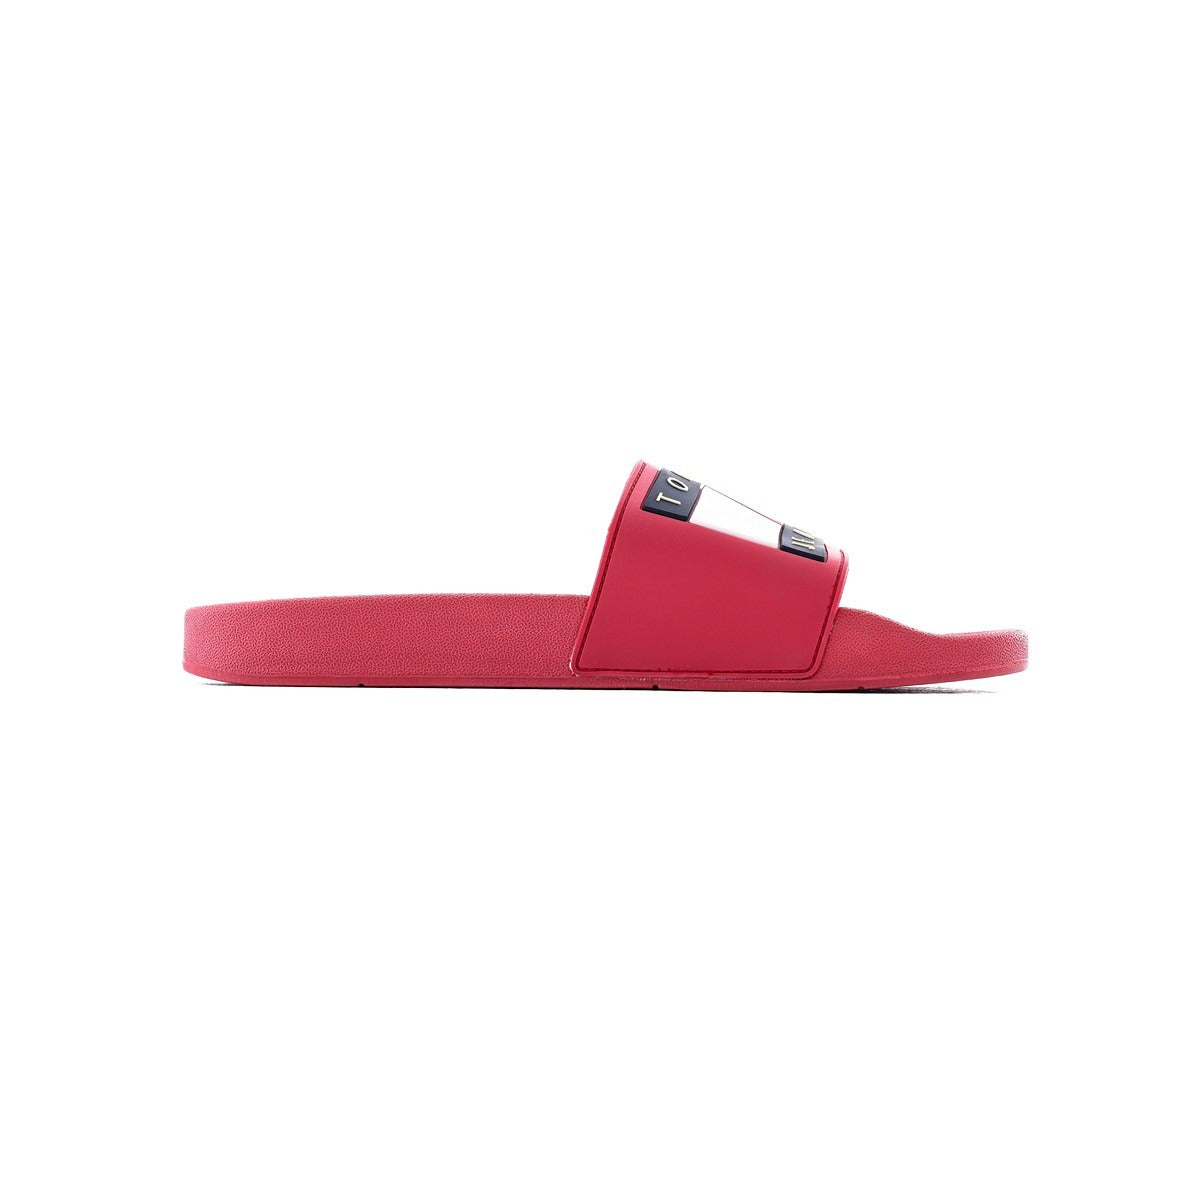 Tommy Hilfiger Jeans EARTHY Red Slipper #SL-01